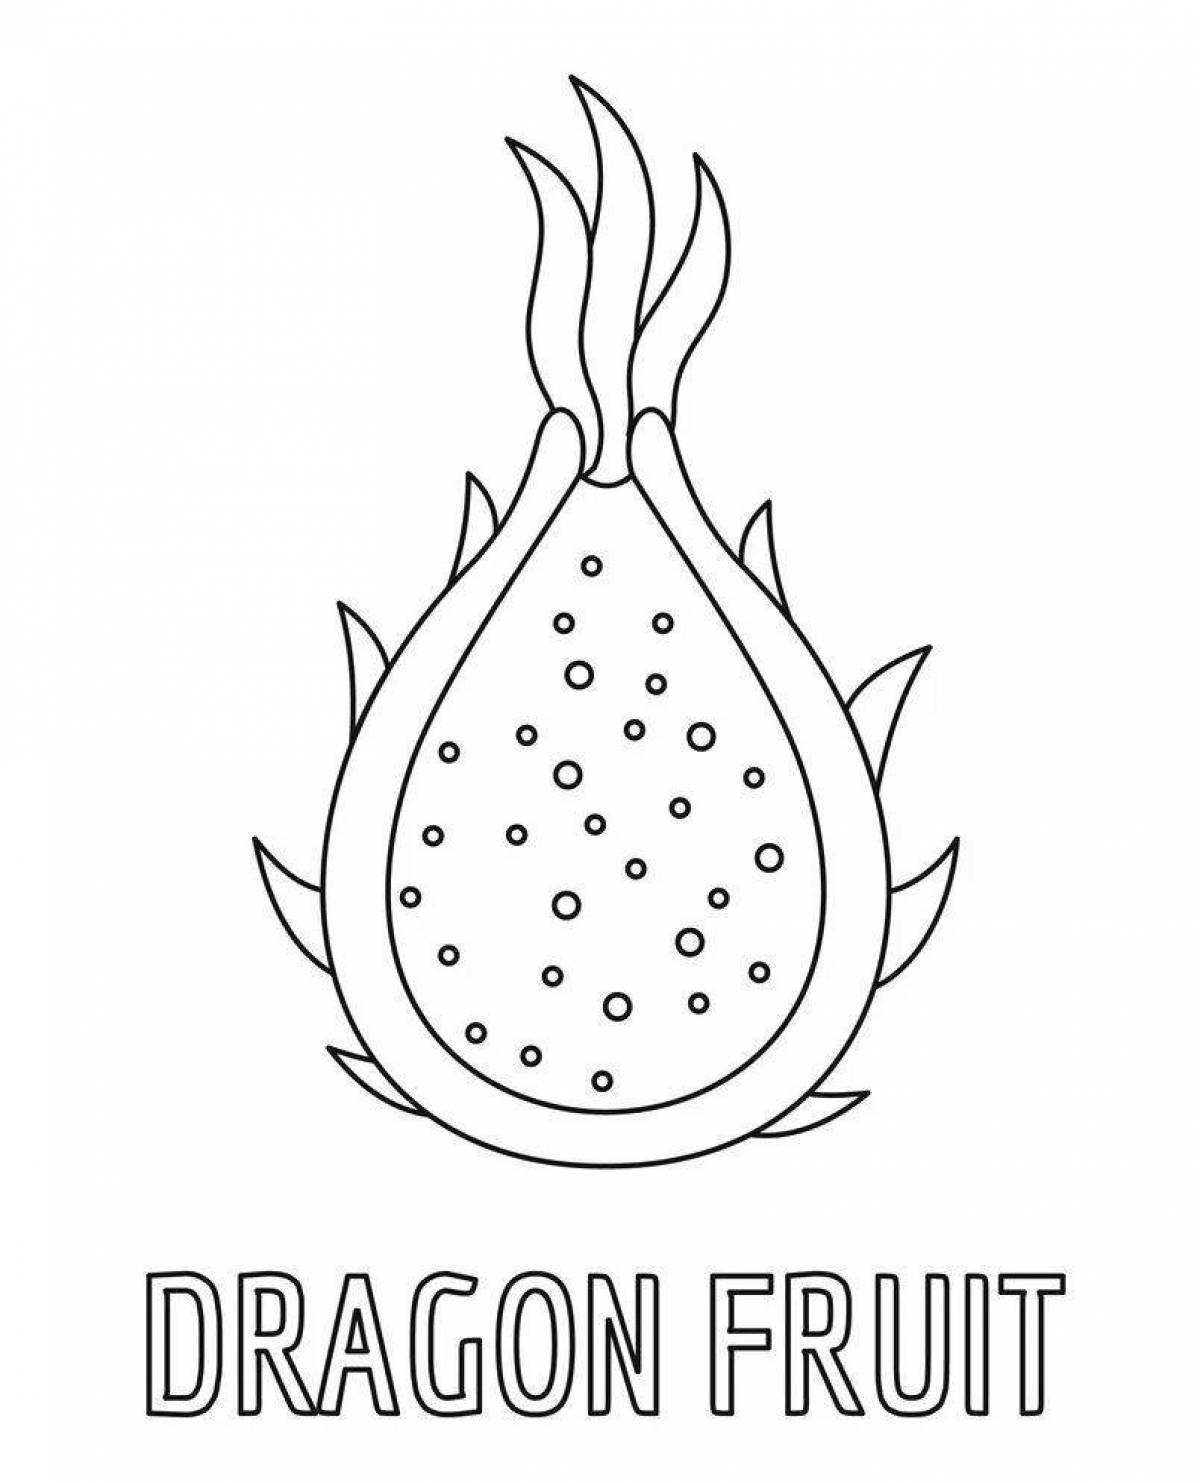 Dazzling dragon fruit coloring page